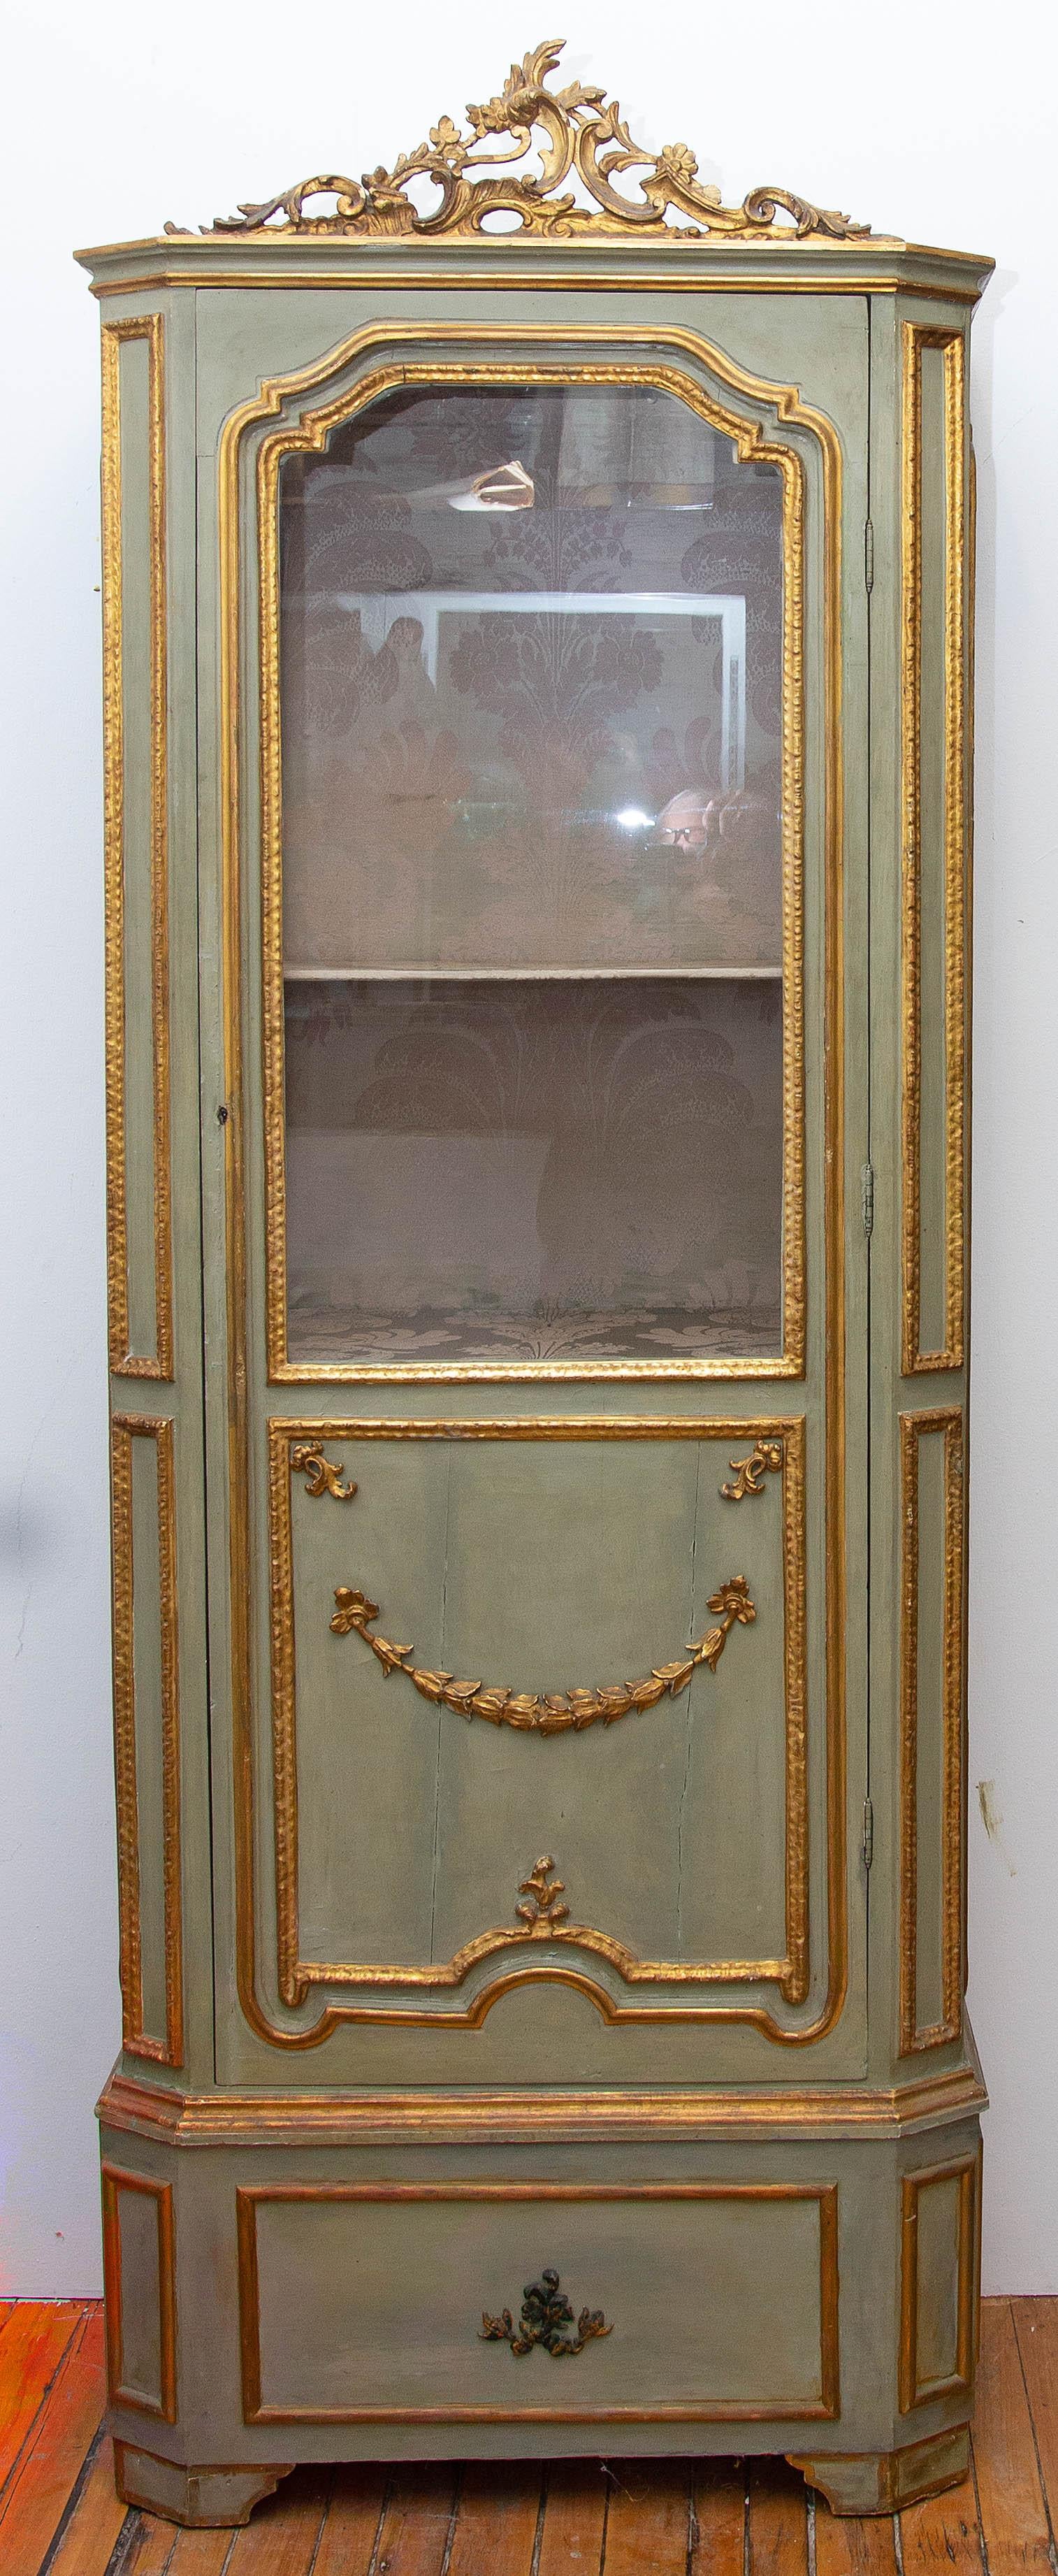 19th century Italian painted and parcel-gilt curio cabinet. Carved wood. Louis XVI style. Original damask silk interior. Fitted with an interior light.
  